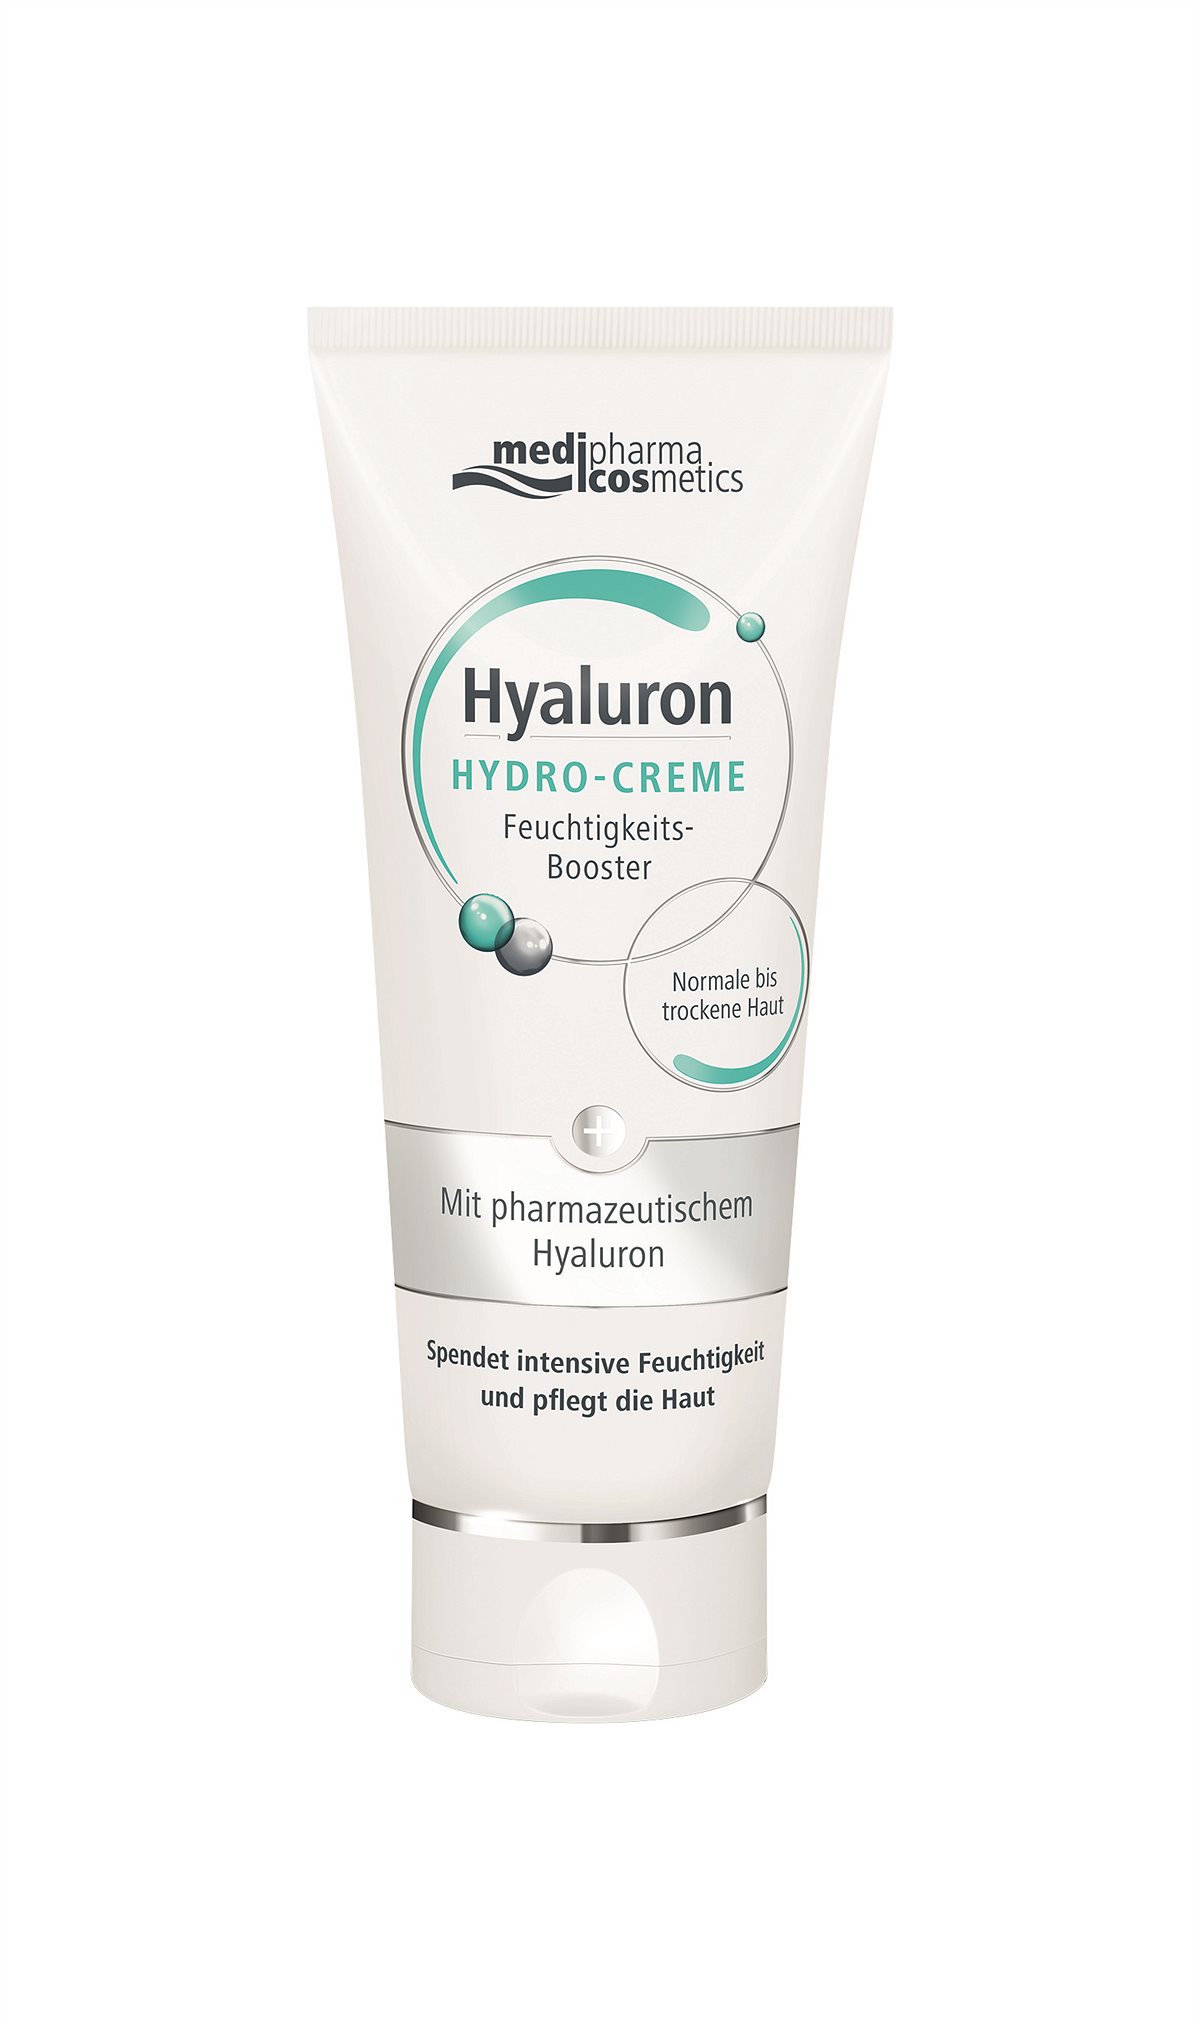 medipharma cosmetics Hyaluron HYDRO-CREME Feuchtigkeits-Booster